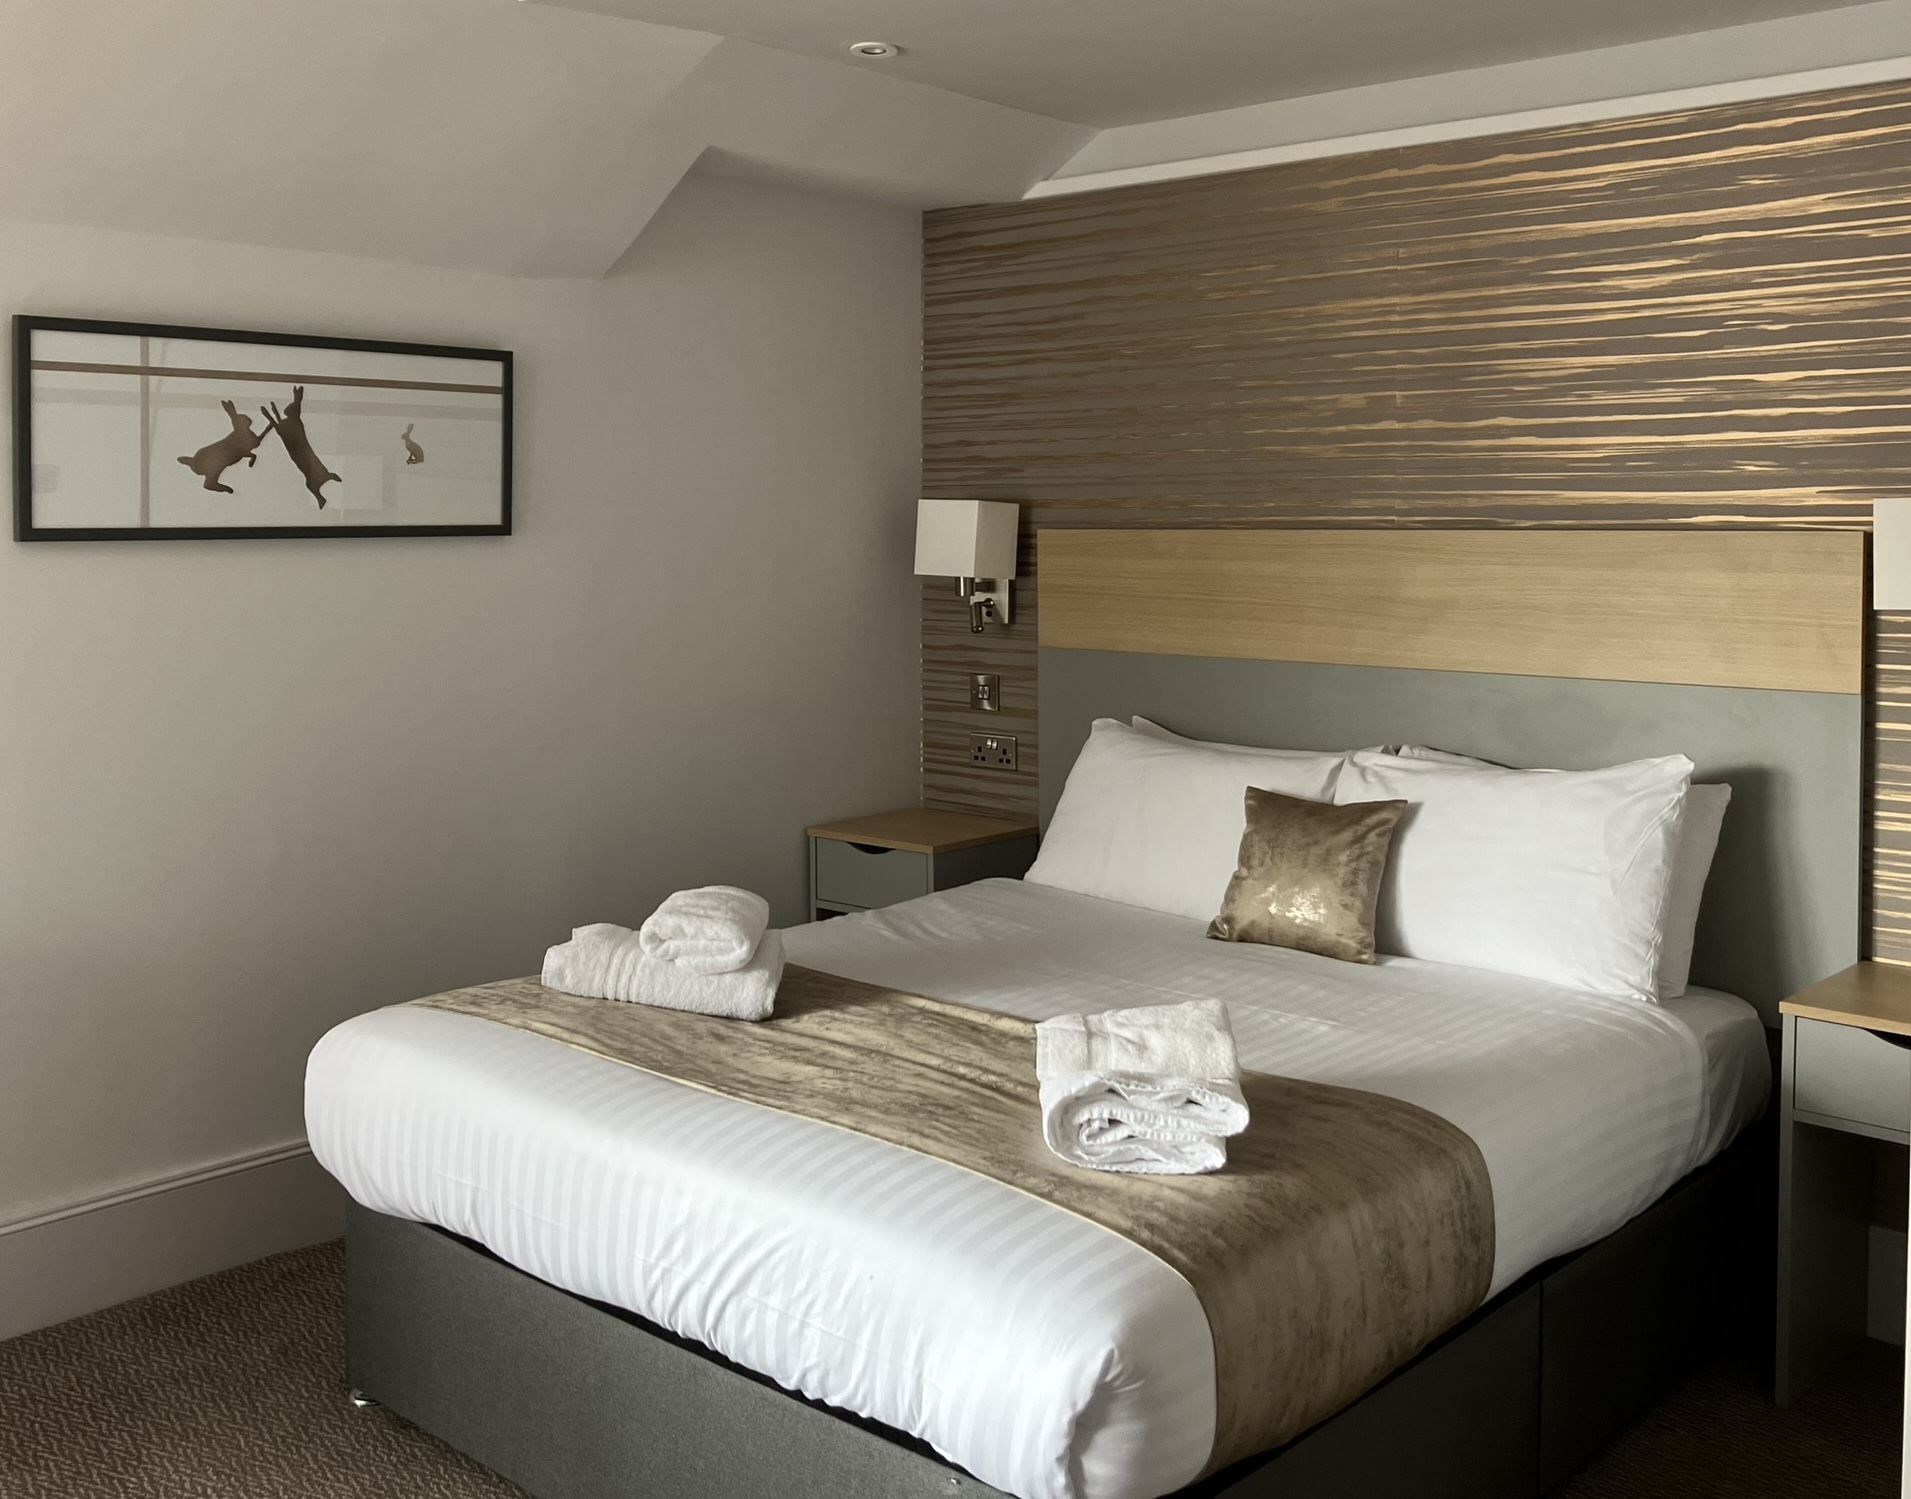 New refurbished bedroom at the Caledonian Hotel, Ullapool. Picture: Iona MacDonald.